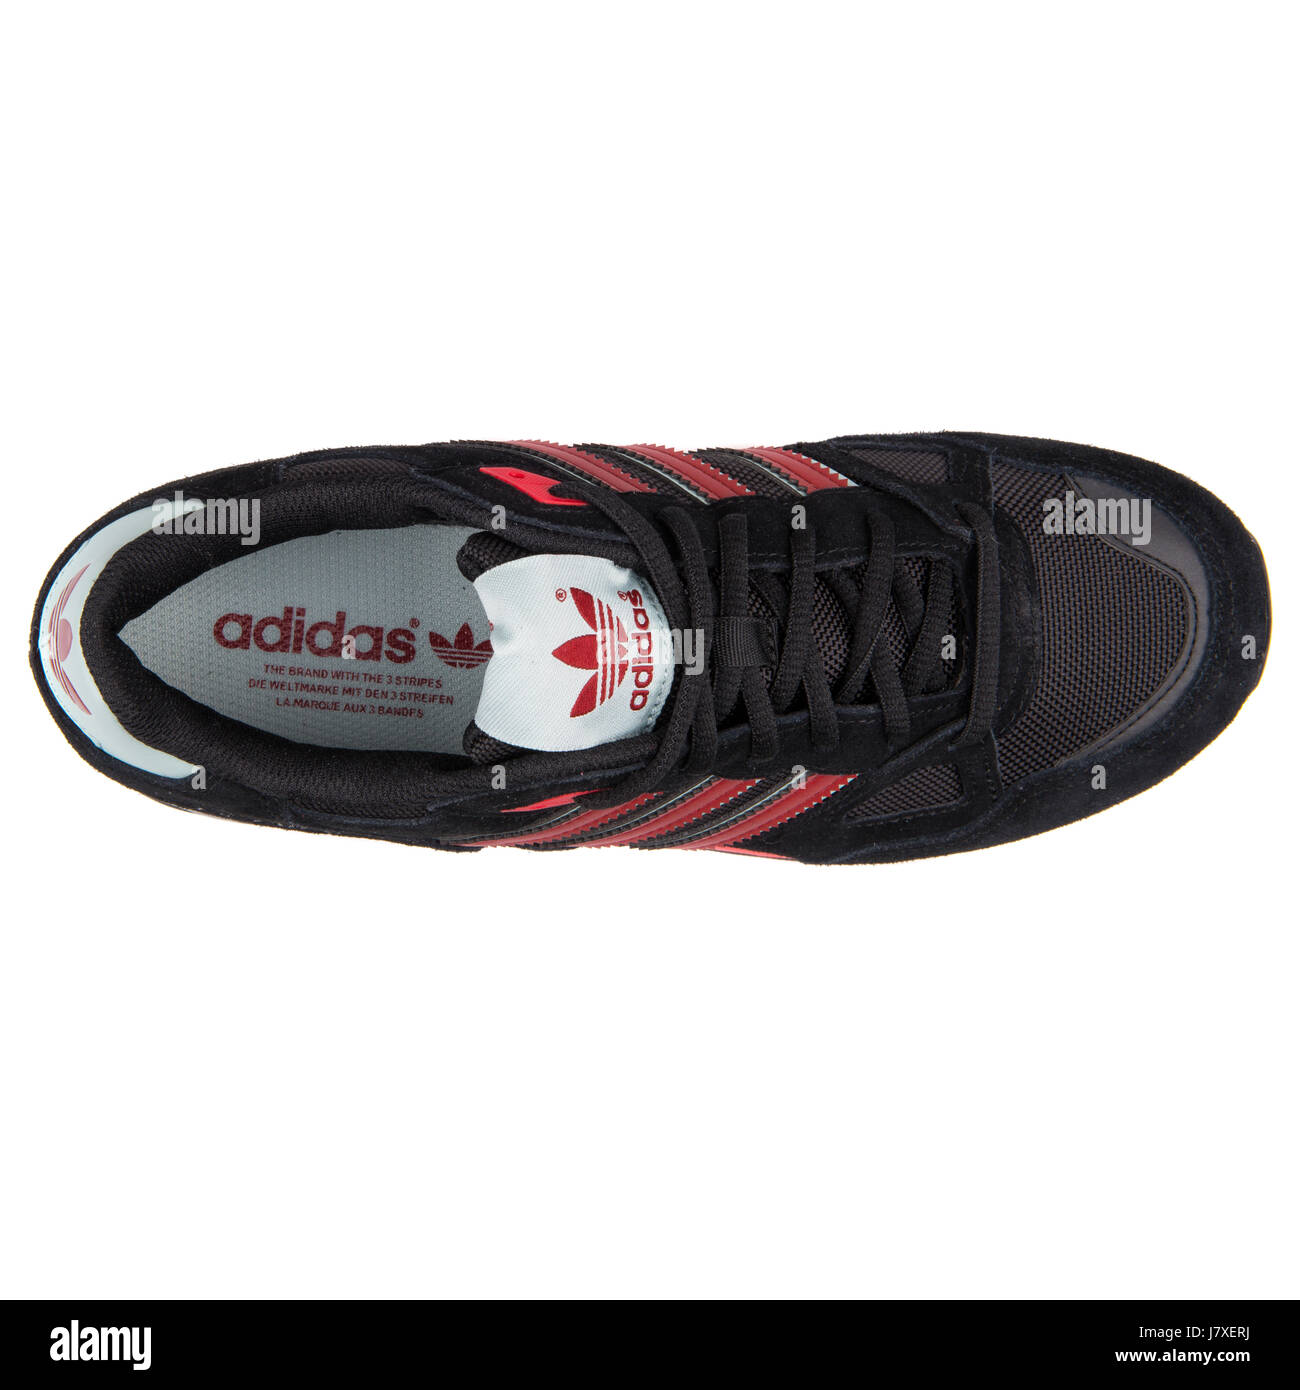 Adidas ZX 750 Men's black with Red Sneakers - B24856 Photo Stock - Alamy